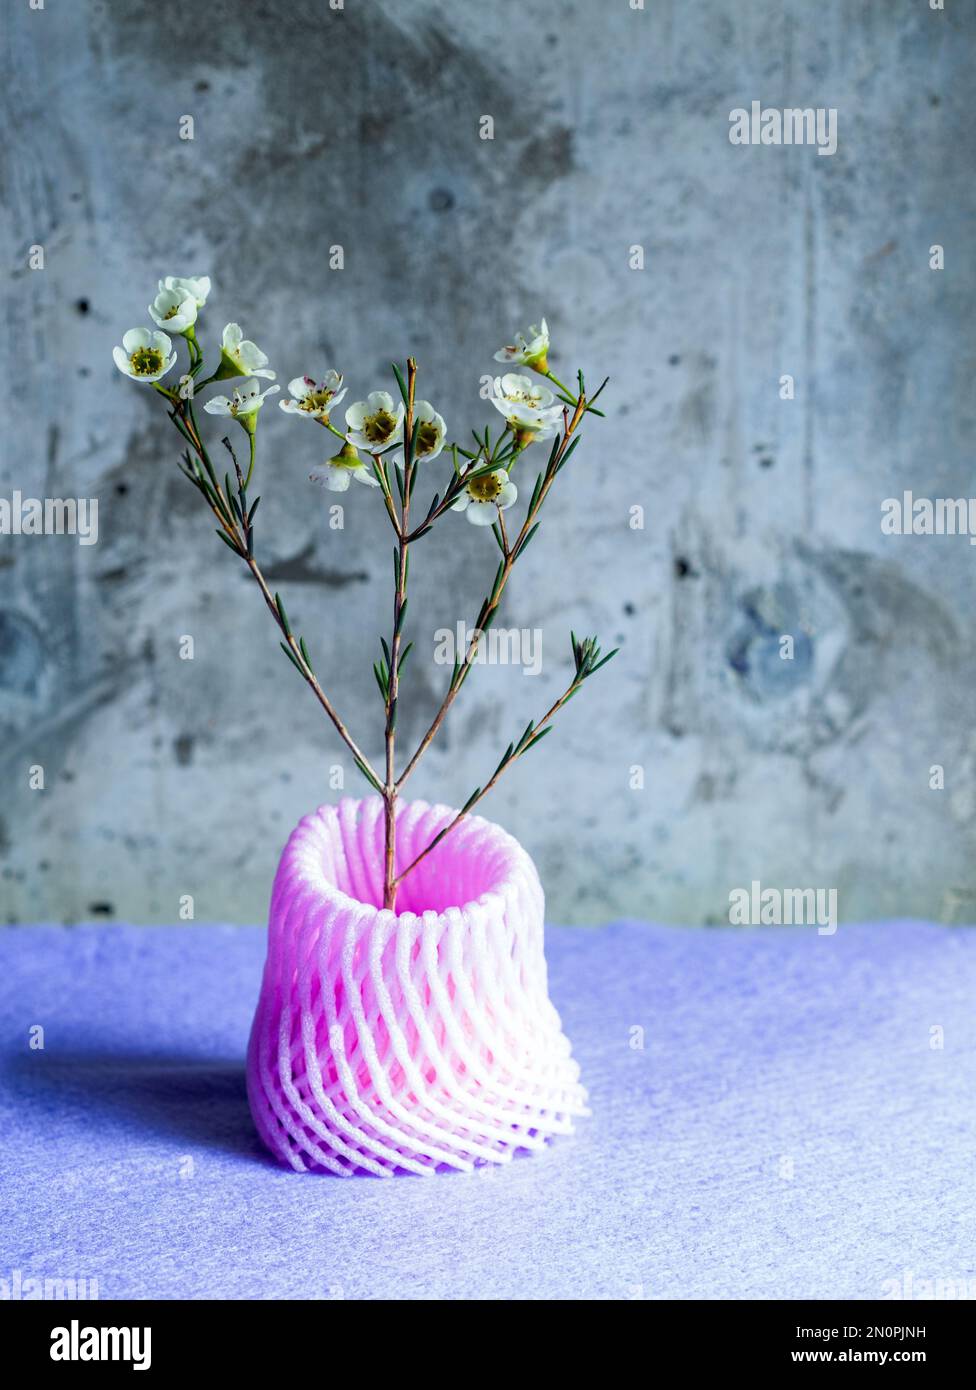 Studio shot, a stem of small white flowers in a pink recycled plastic mesh vase. Stock Photo